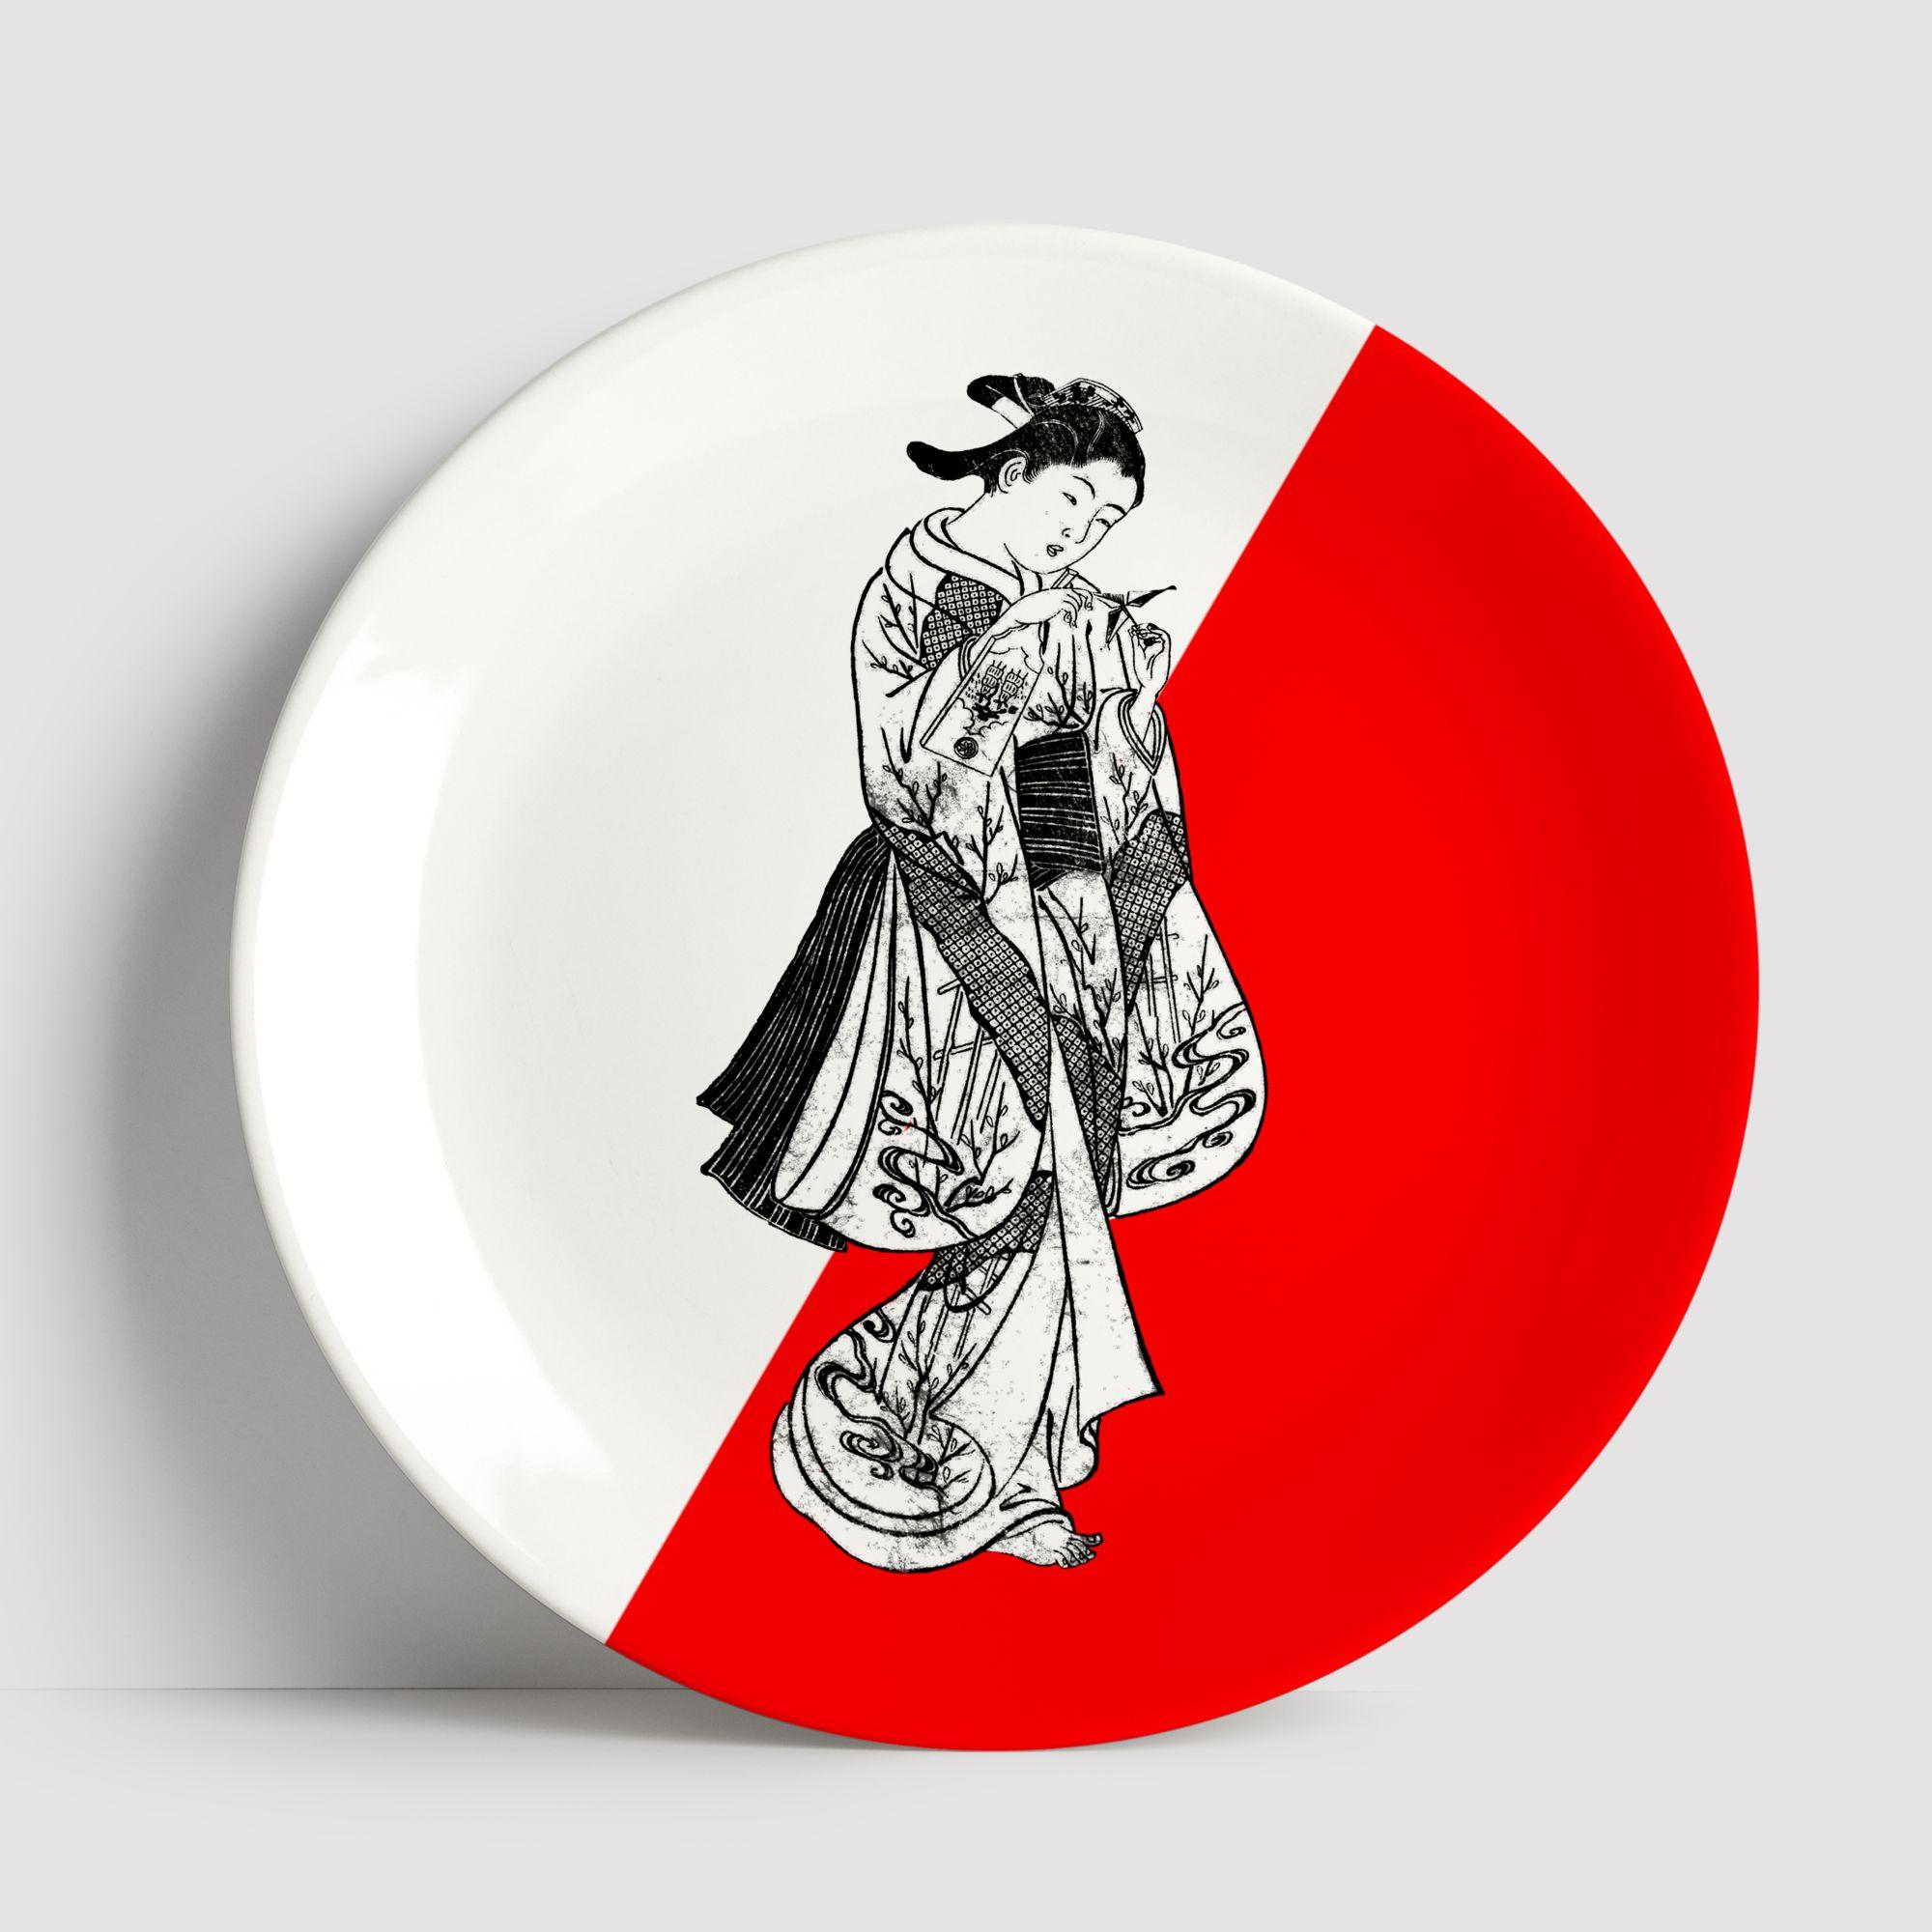 Beautiful Woman Japanese porcelain dinner plate by Plus Lab will make an elegant statement with sophisticated Art de la table for every occasion

Handmade in Italy

Upon request available in a set of three or six plates.